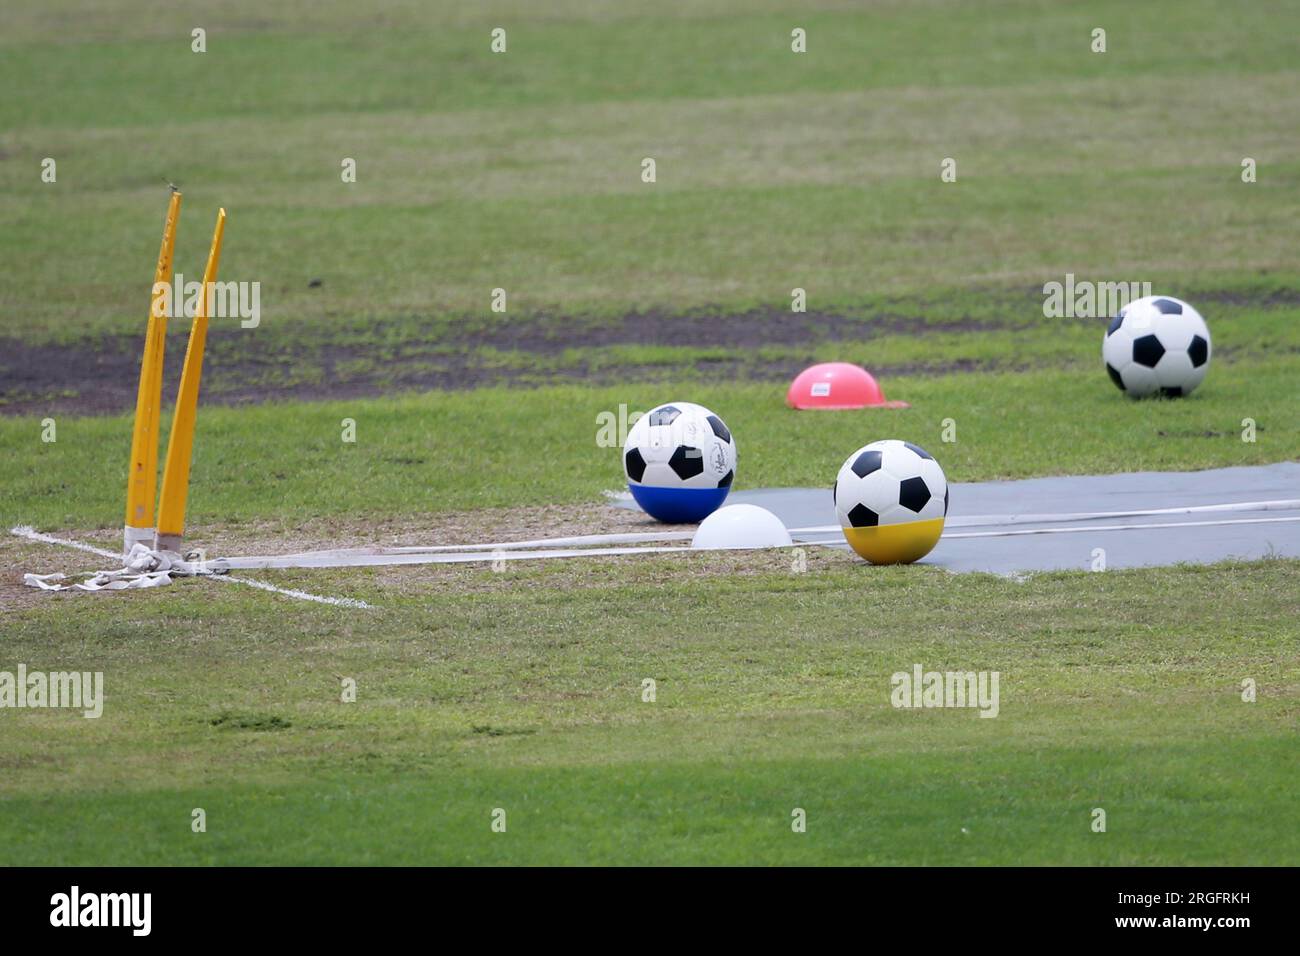 Bowling pitch decorated by football during Bangladeshi national cricketers attend practice session at Sher-e-Bangla National Cricket Stadium in Mirpur Stock Photo